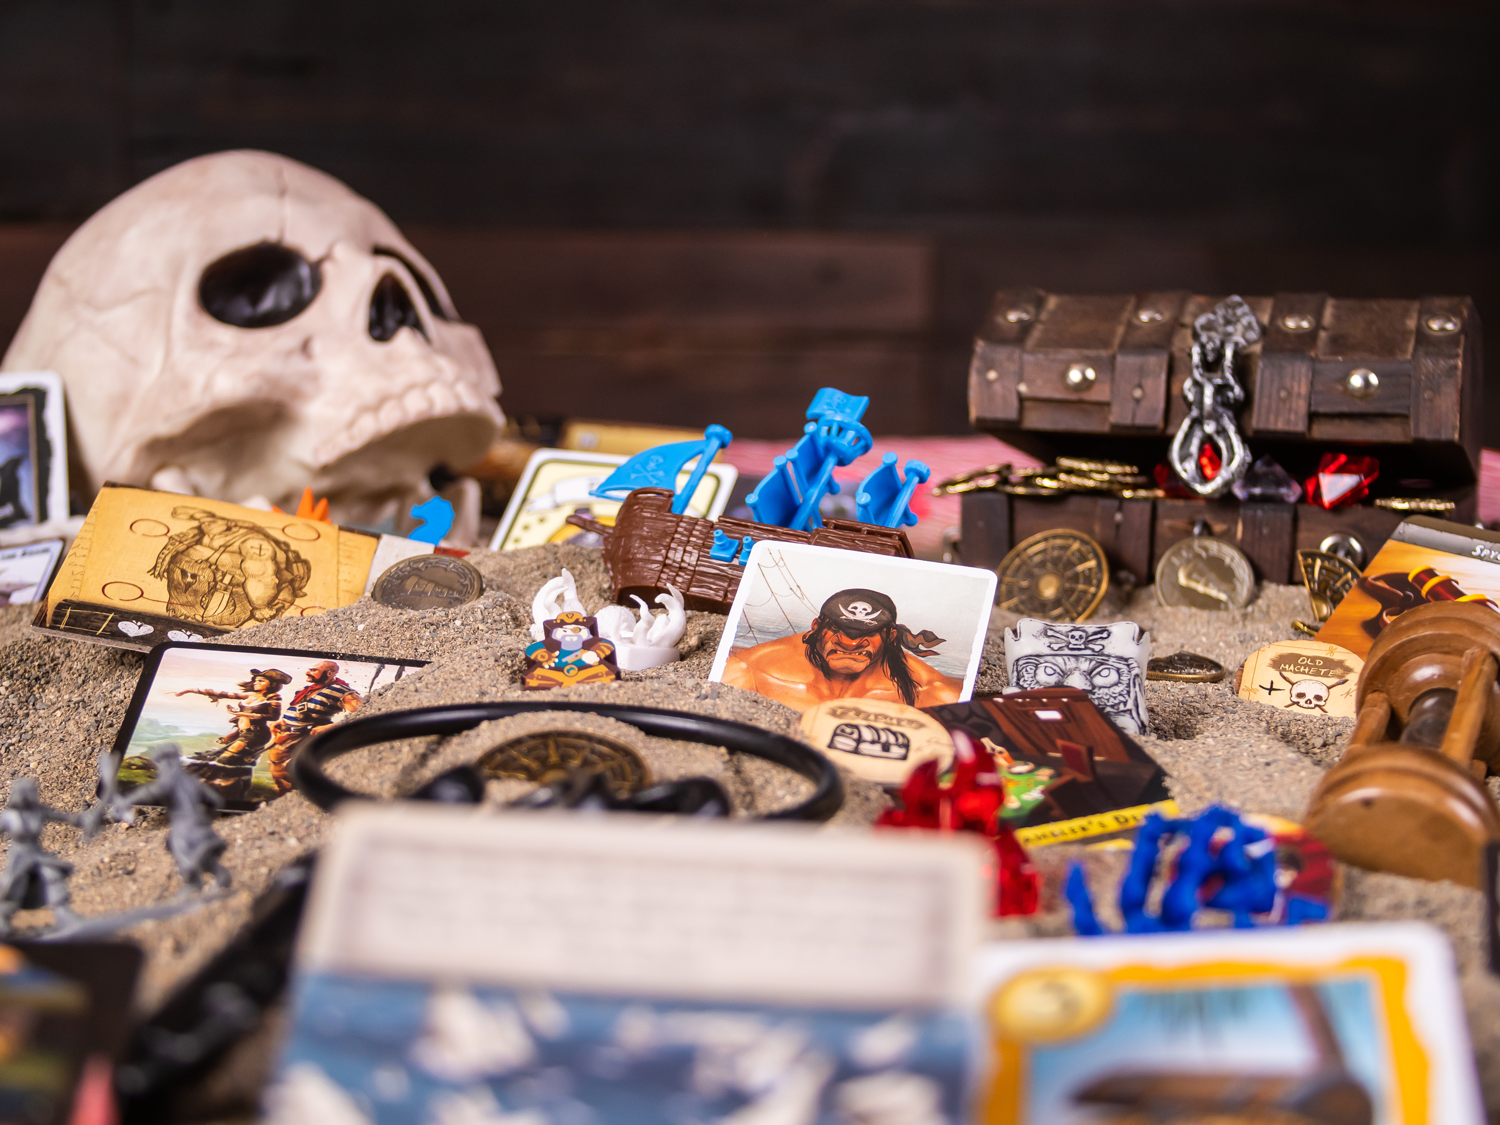 The Pirate photograph setupImage © Kevin Grote @OldManGames